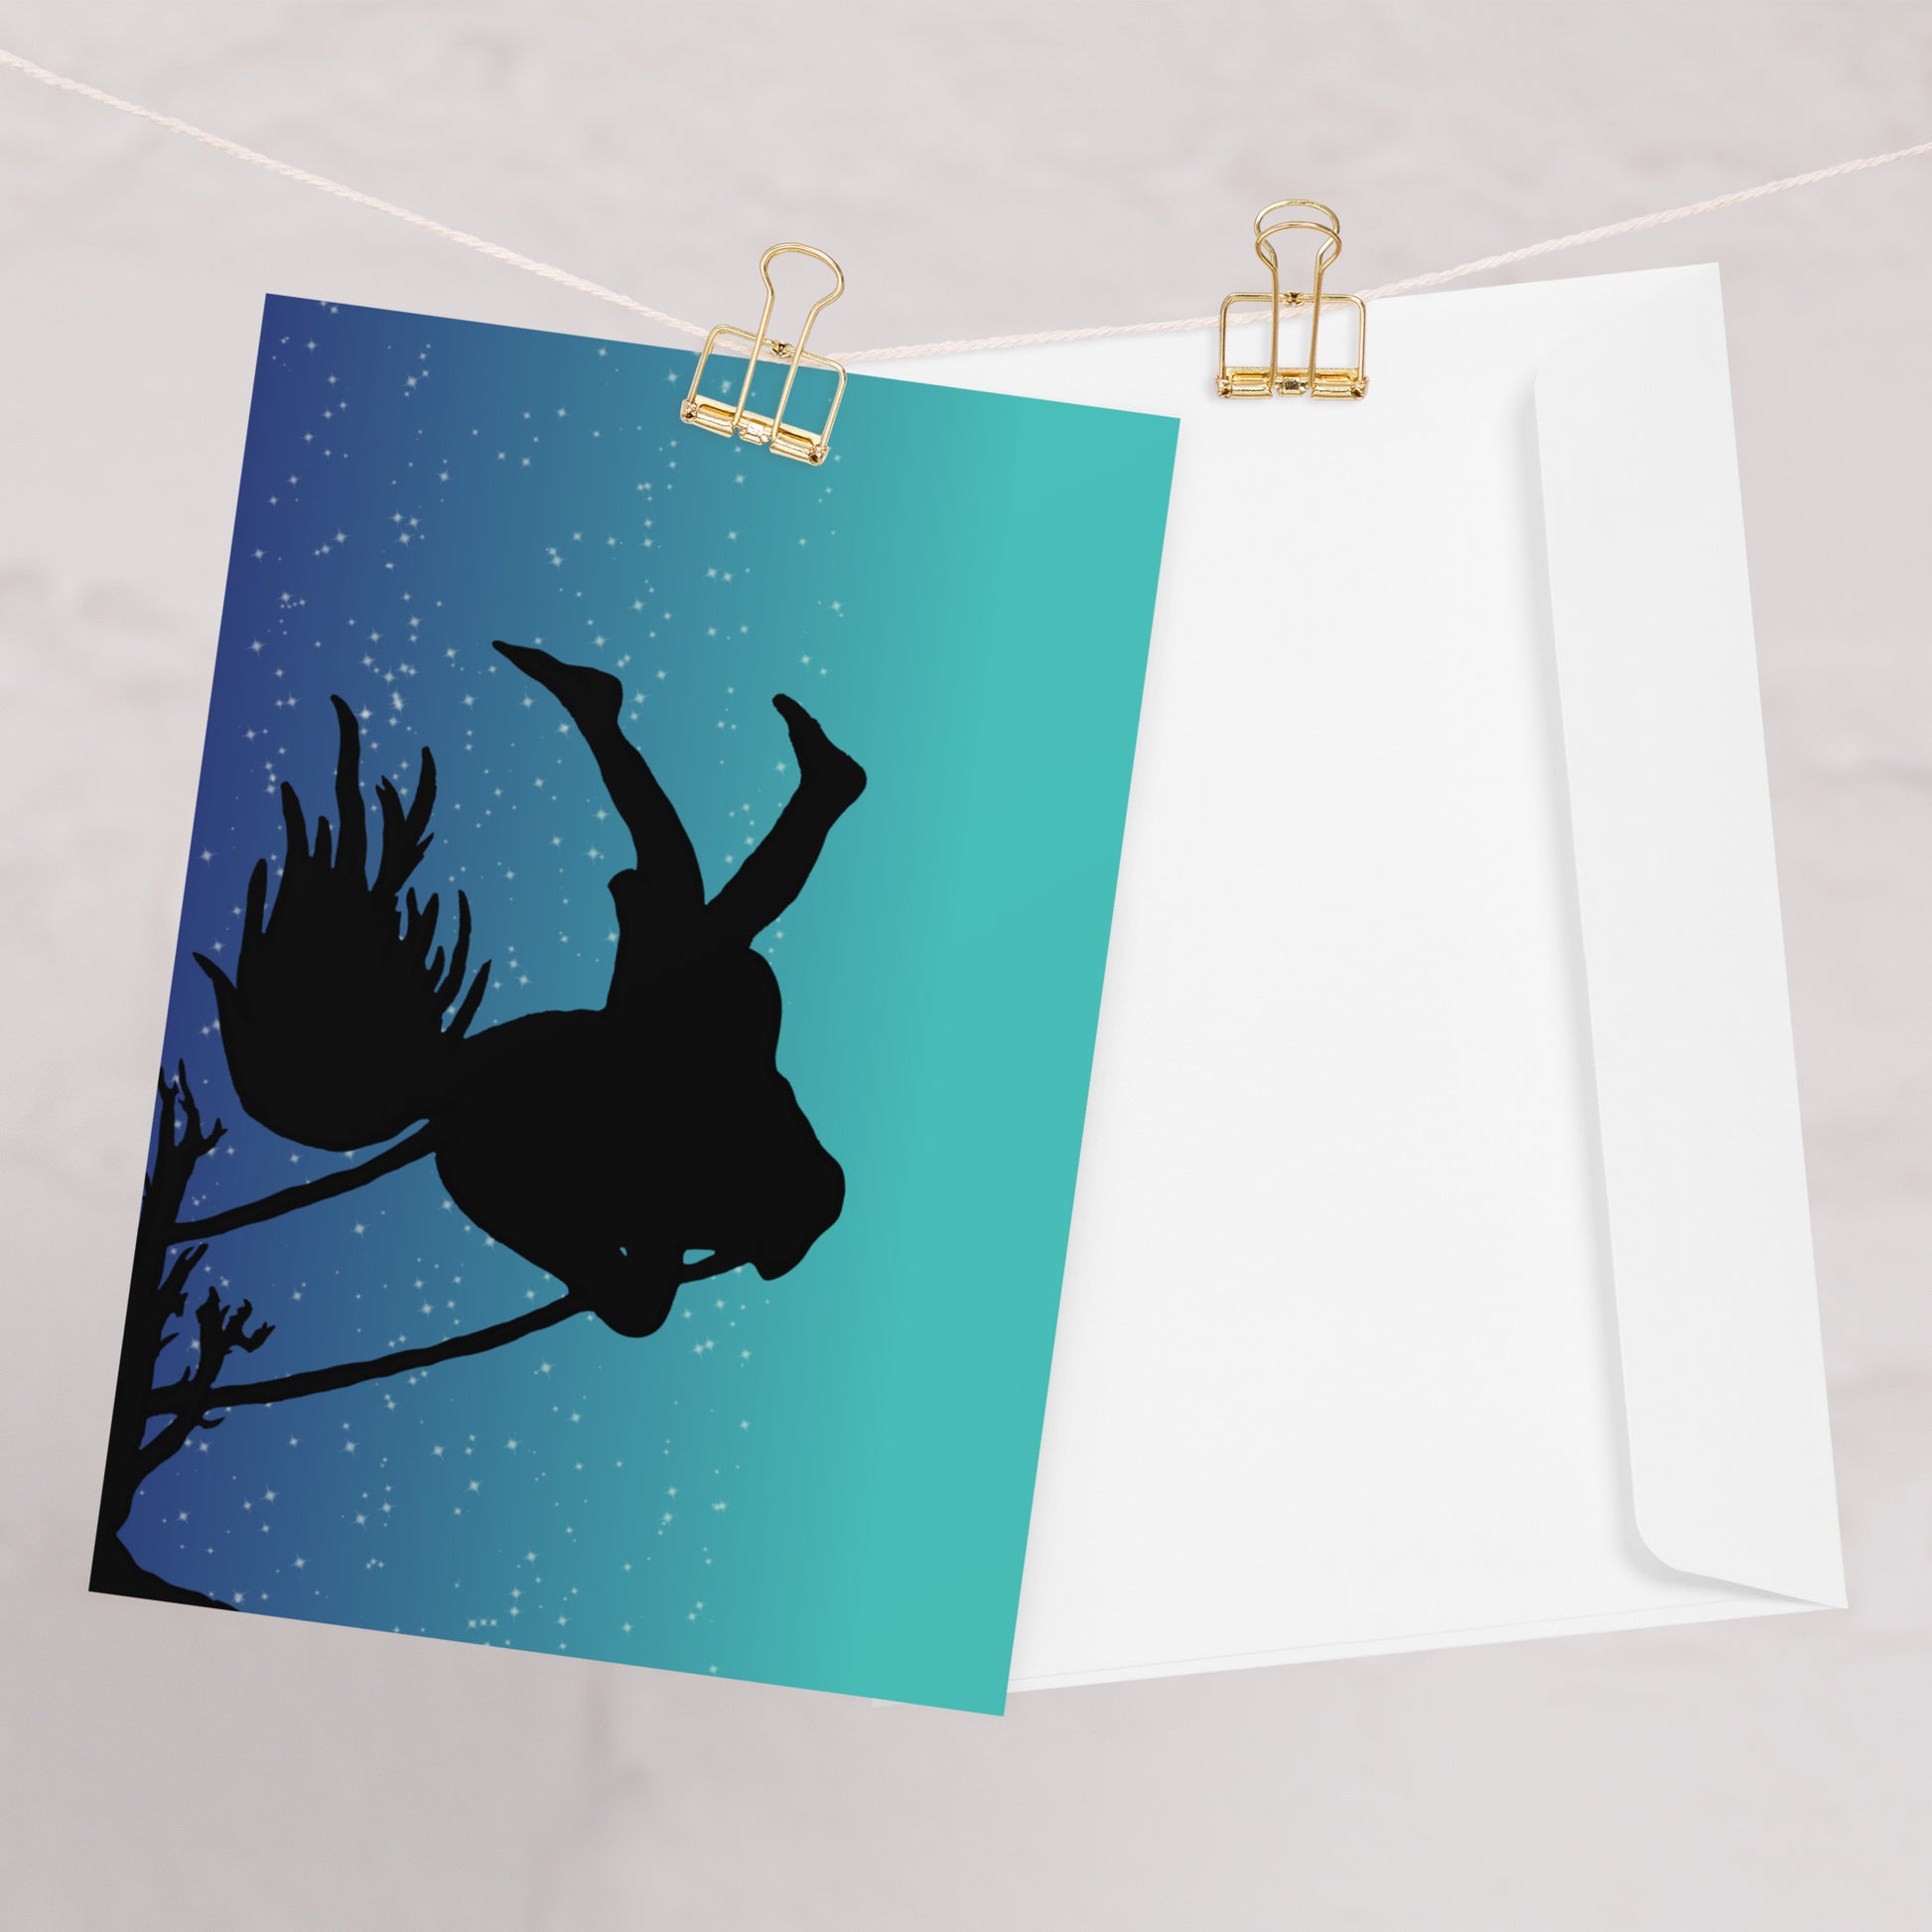 Pack of ten 5.5 by 8.5 inch Night Swing greeting cards and envelopes. Front shows silhouette of a girl in a tree swing against a starry summer night sky. Inside is blank.  One card shown on clothesline with white envelope.